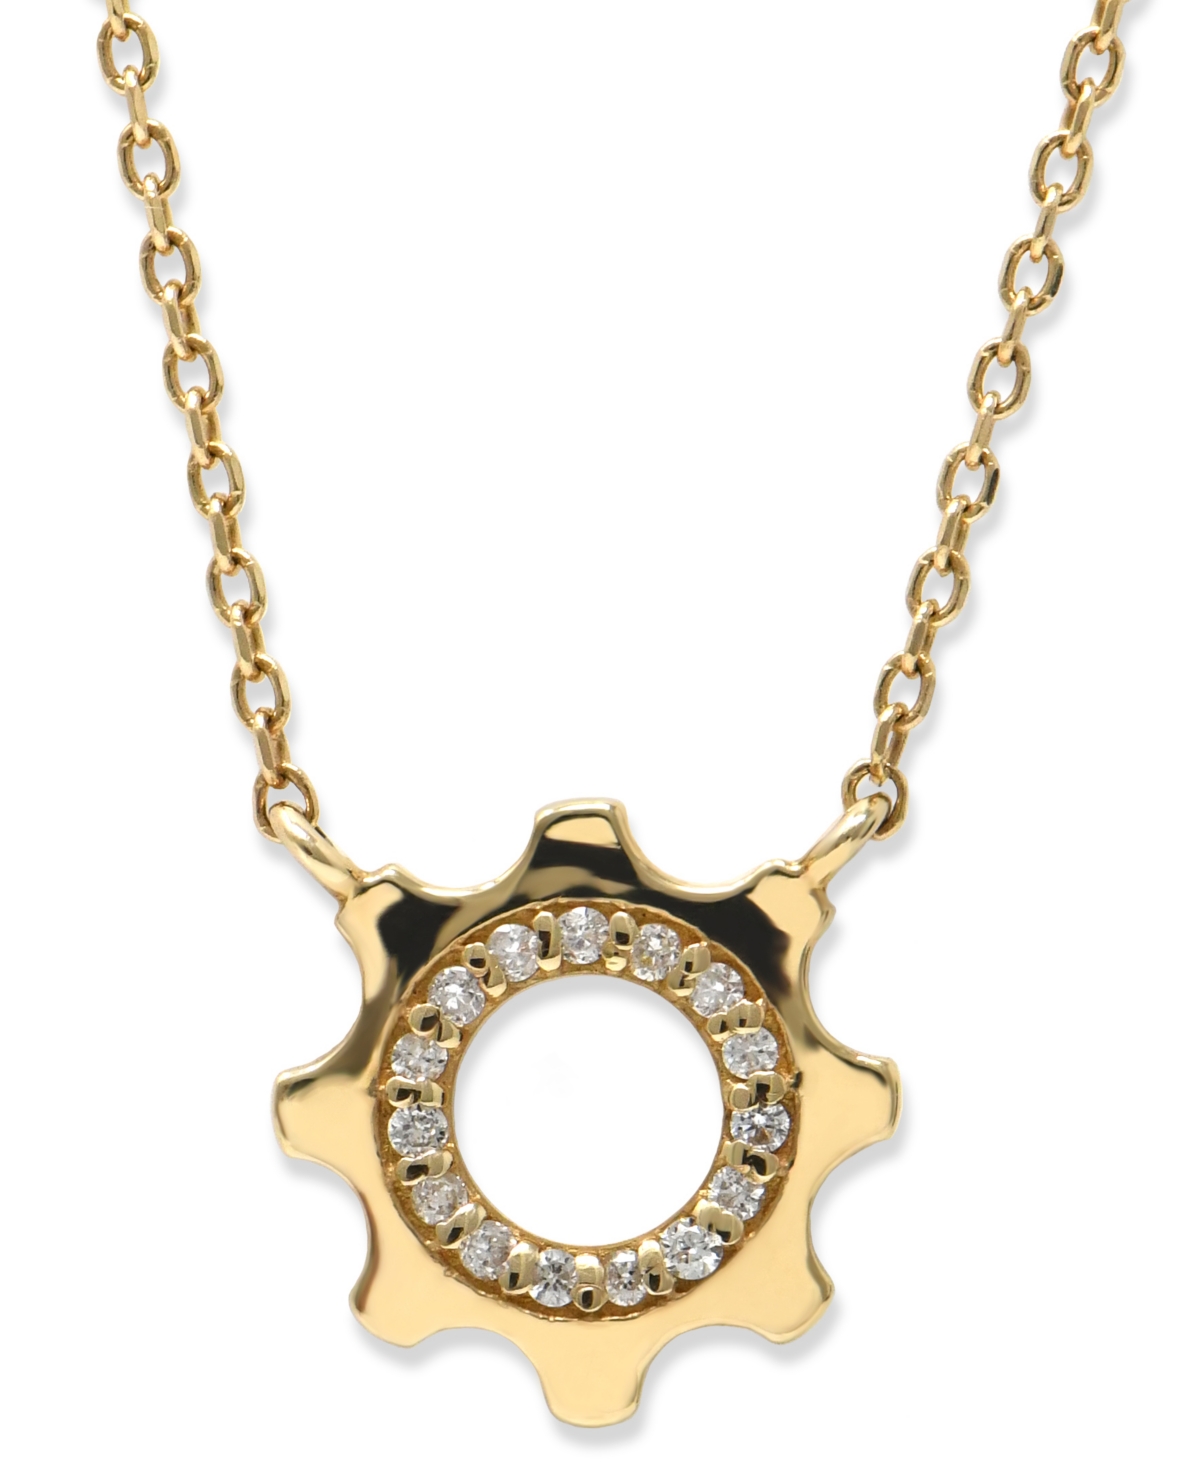 Jac+Jo by Anzie Diamond Cog Pendant Necklace (1/10 ct. t.w.) in 14k Gold, 16" + 1" extender - Gold